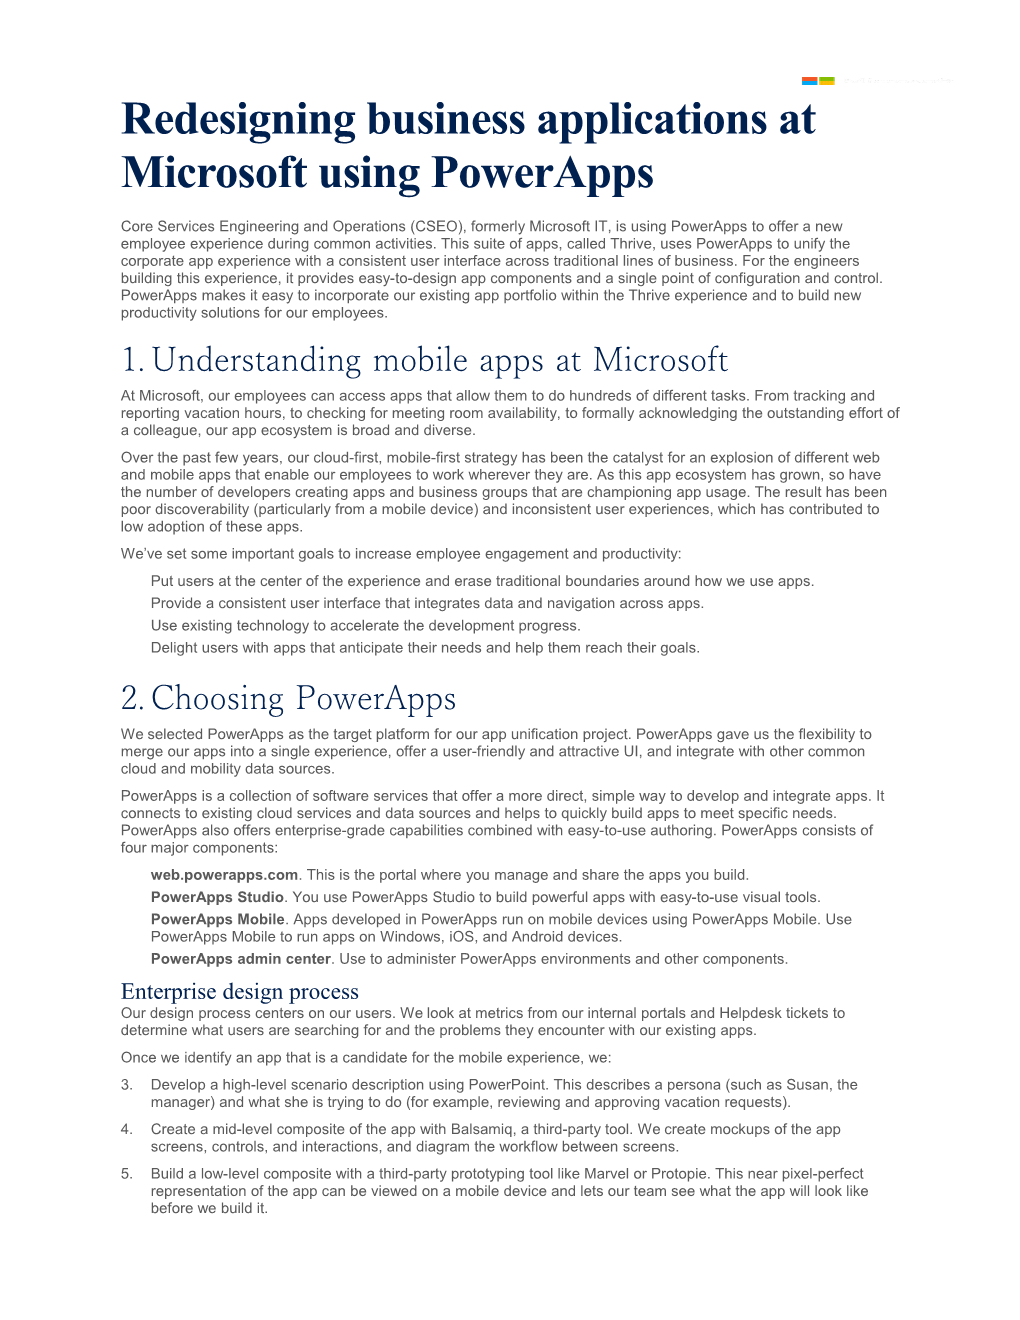 Page 1 Redesigning Business Applications at Microsoft Using Powerapps